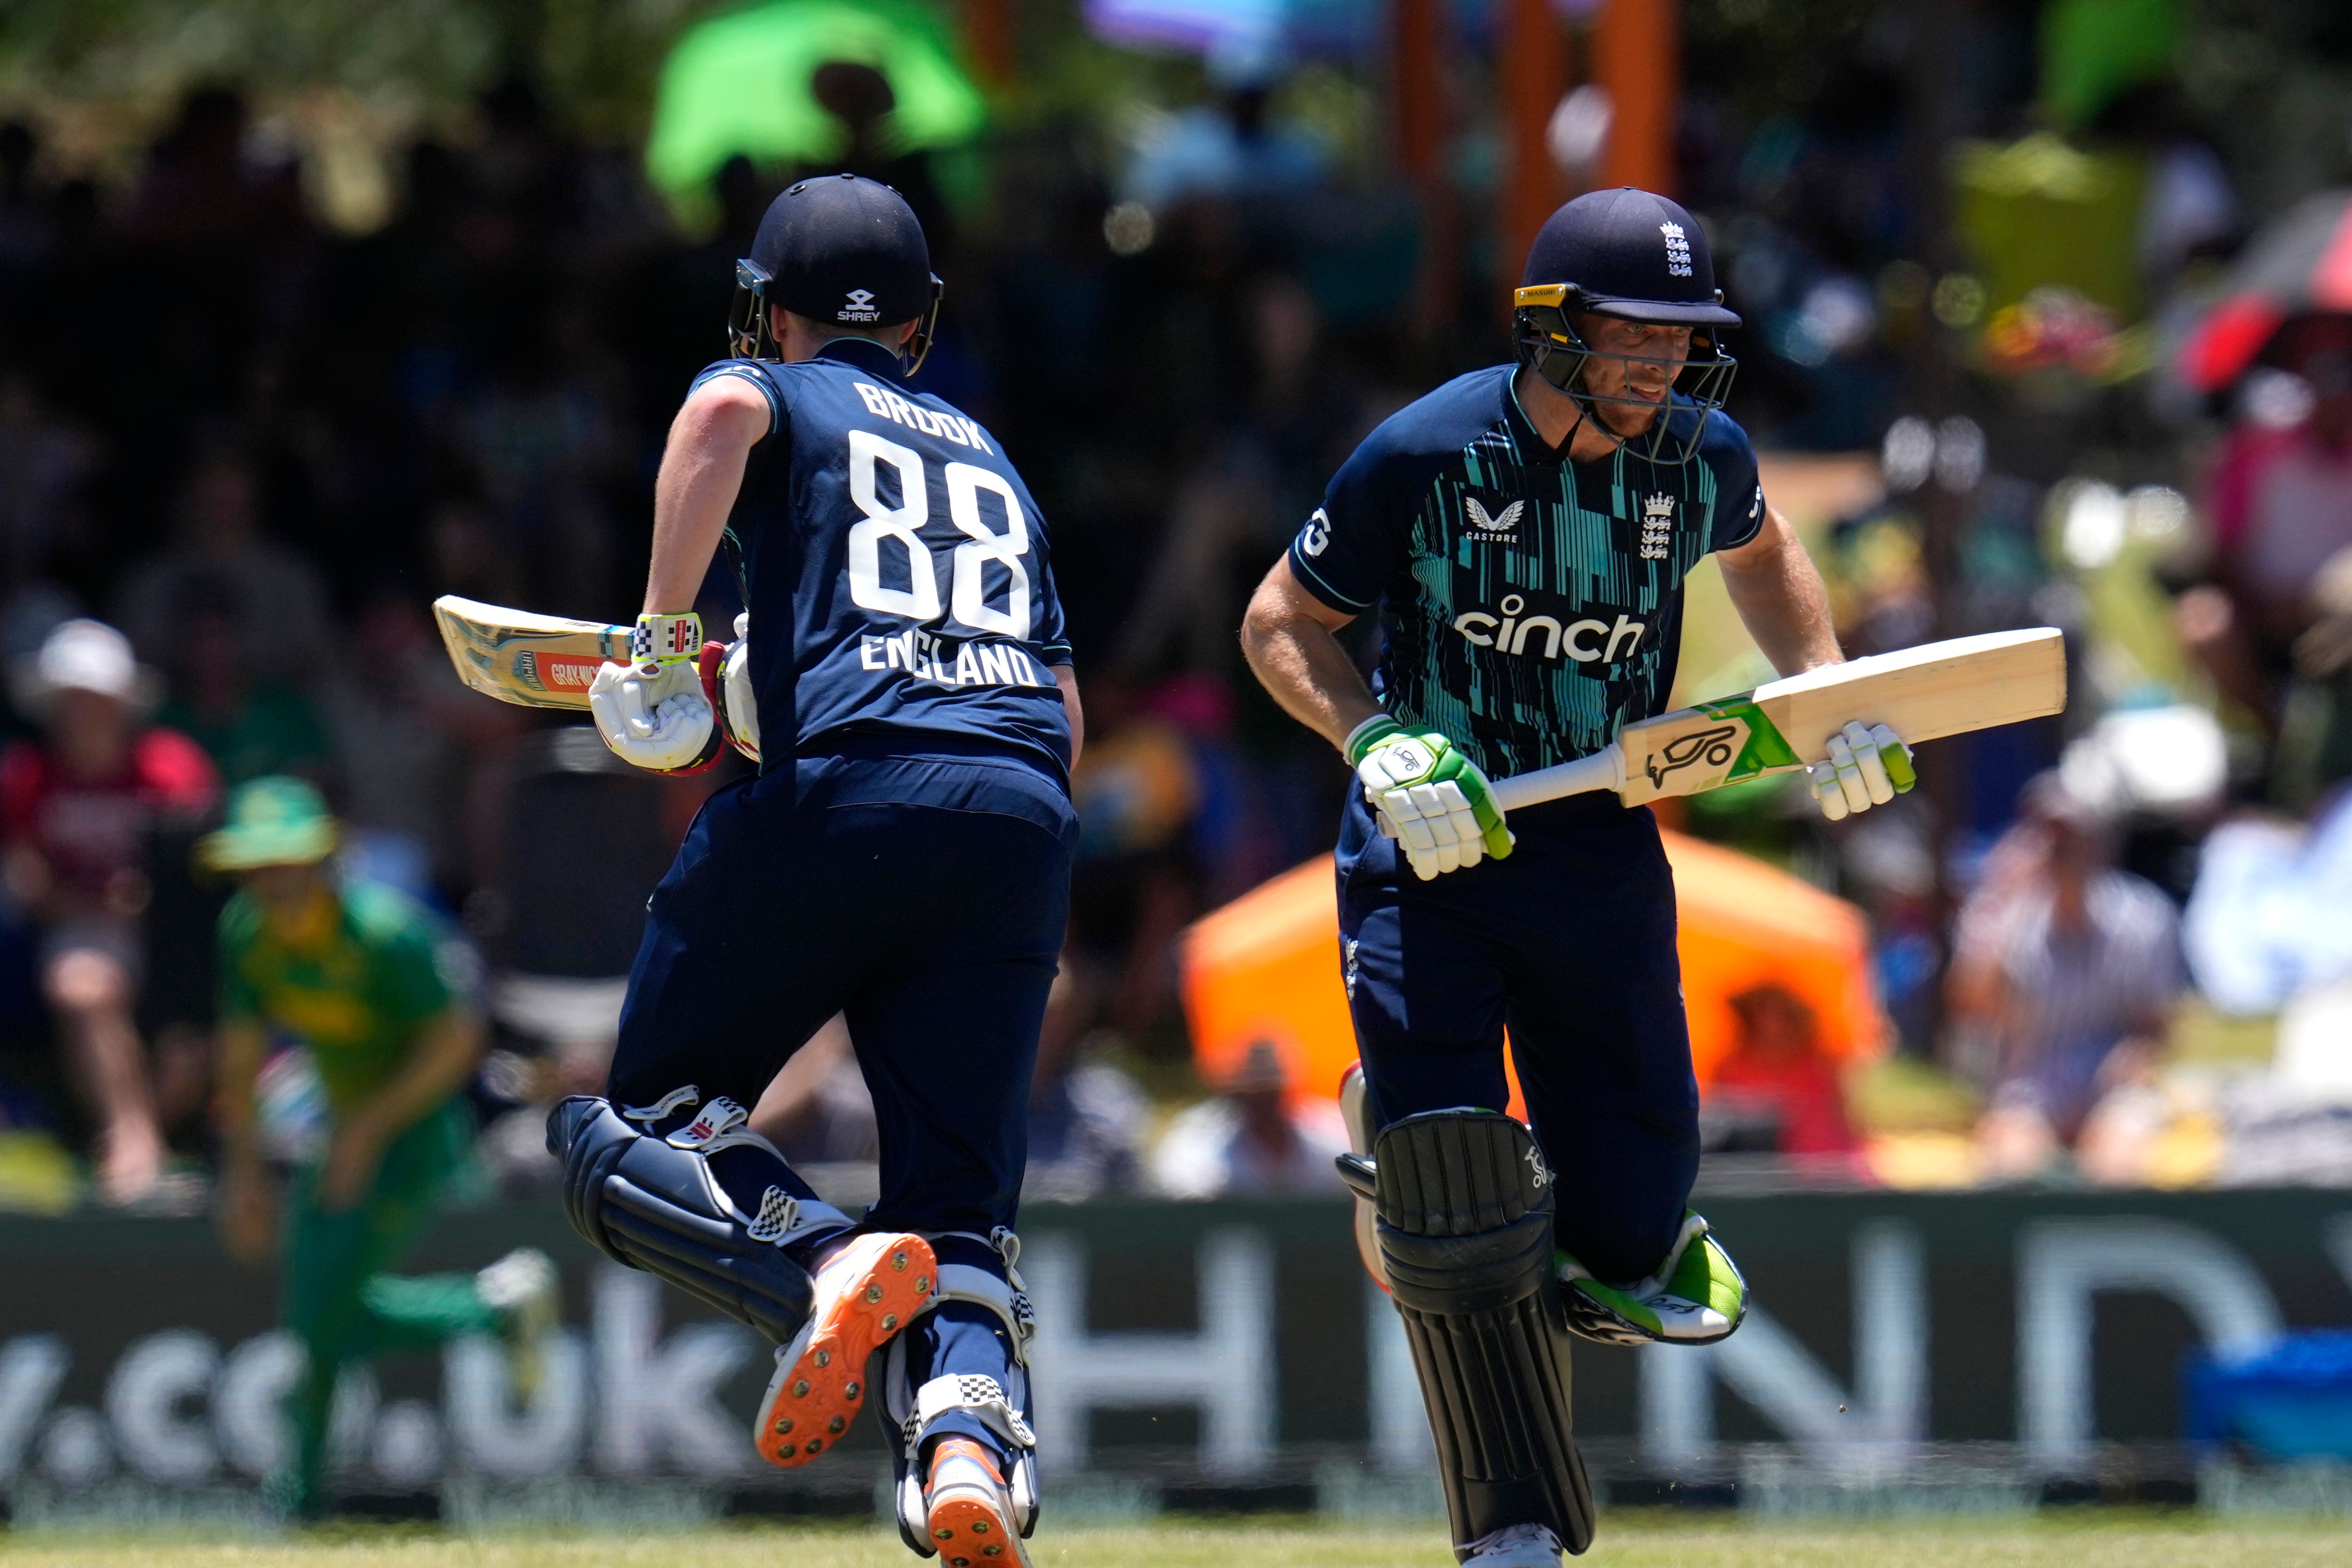 England’s captain Jos Buttler, right, with teammate Harry Brook run between the wickets, during the second One-Day International cricket match between South Africa and England at Mangaung Oval in Bloemfontein, South Africa, Sunday, Jan. 29, 2023. (AP Photo/Themba Hadebe)